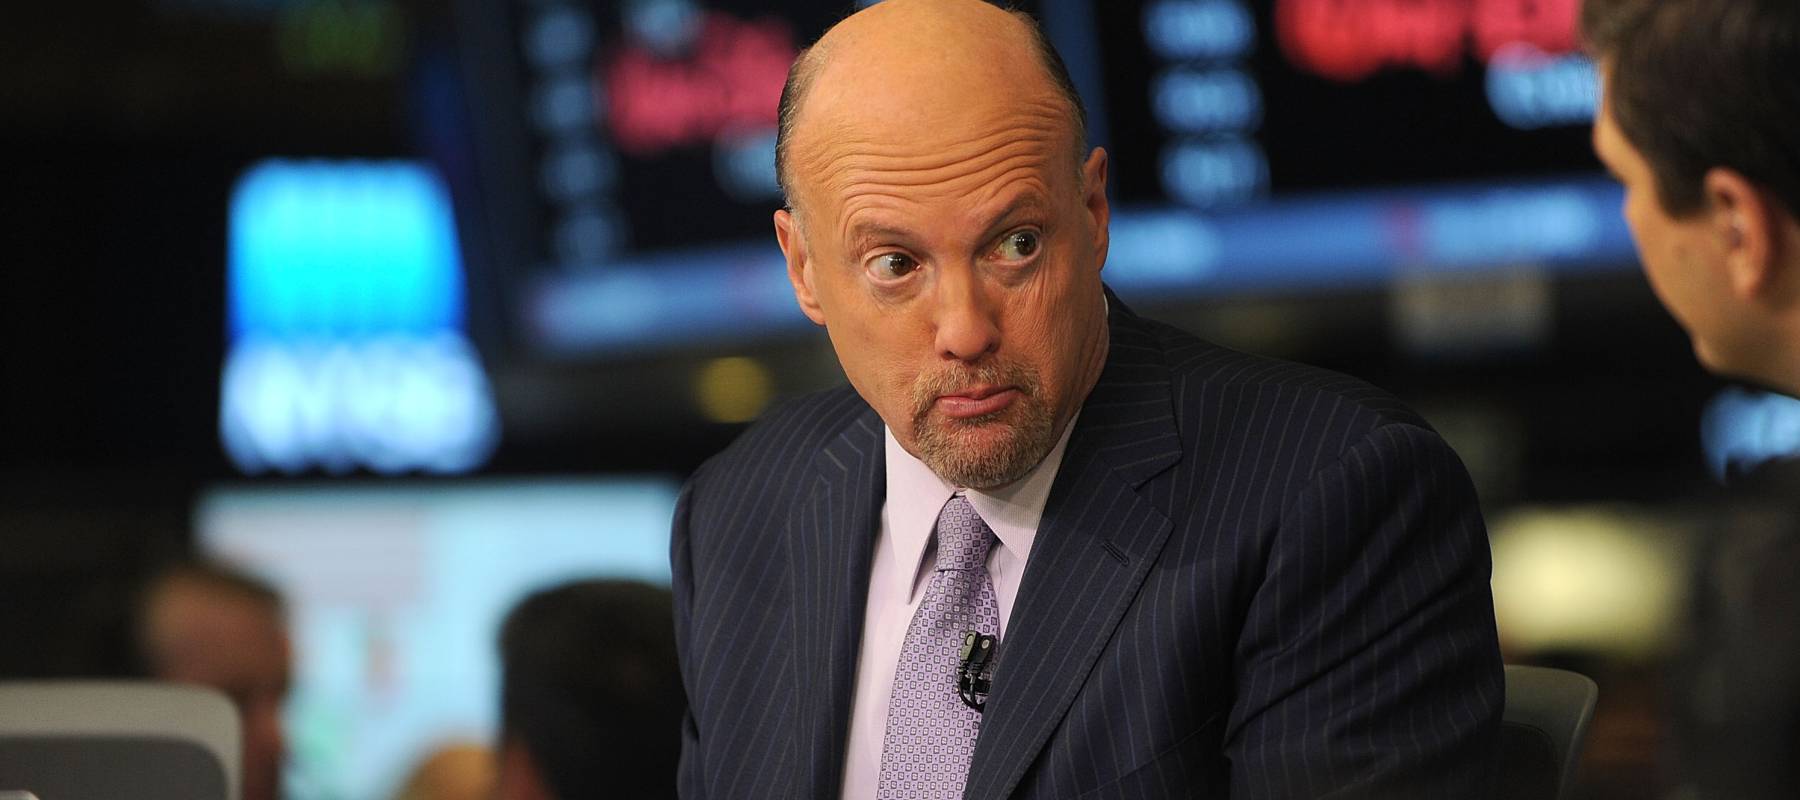 CNBC host Jim Cramer at the New York Stock Exchange in New York, Feb. 1, 2016.